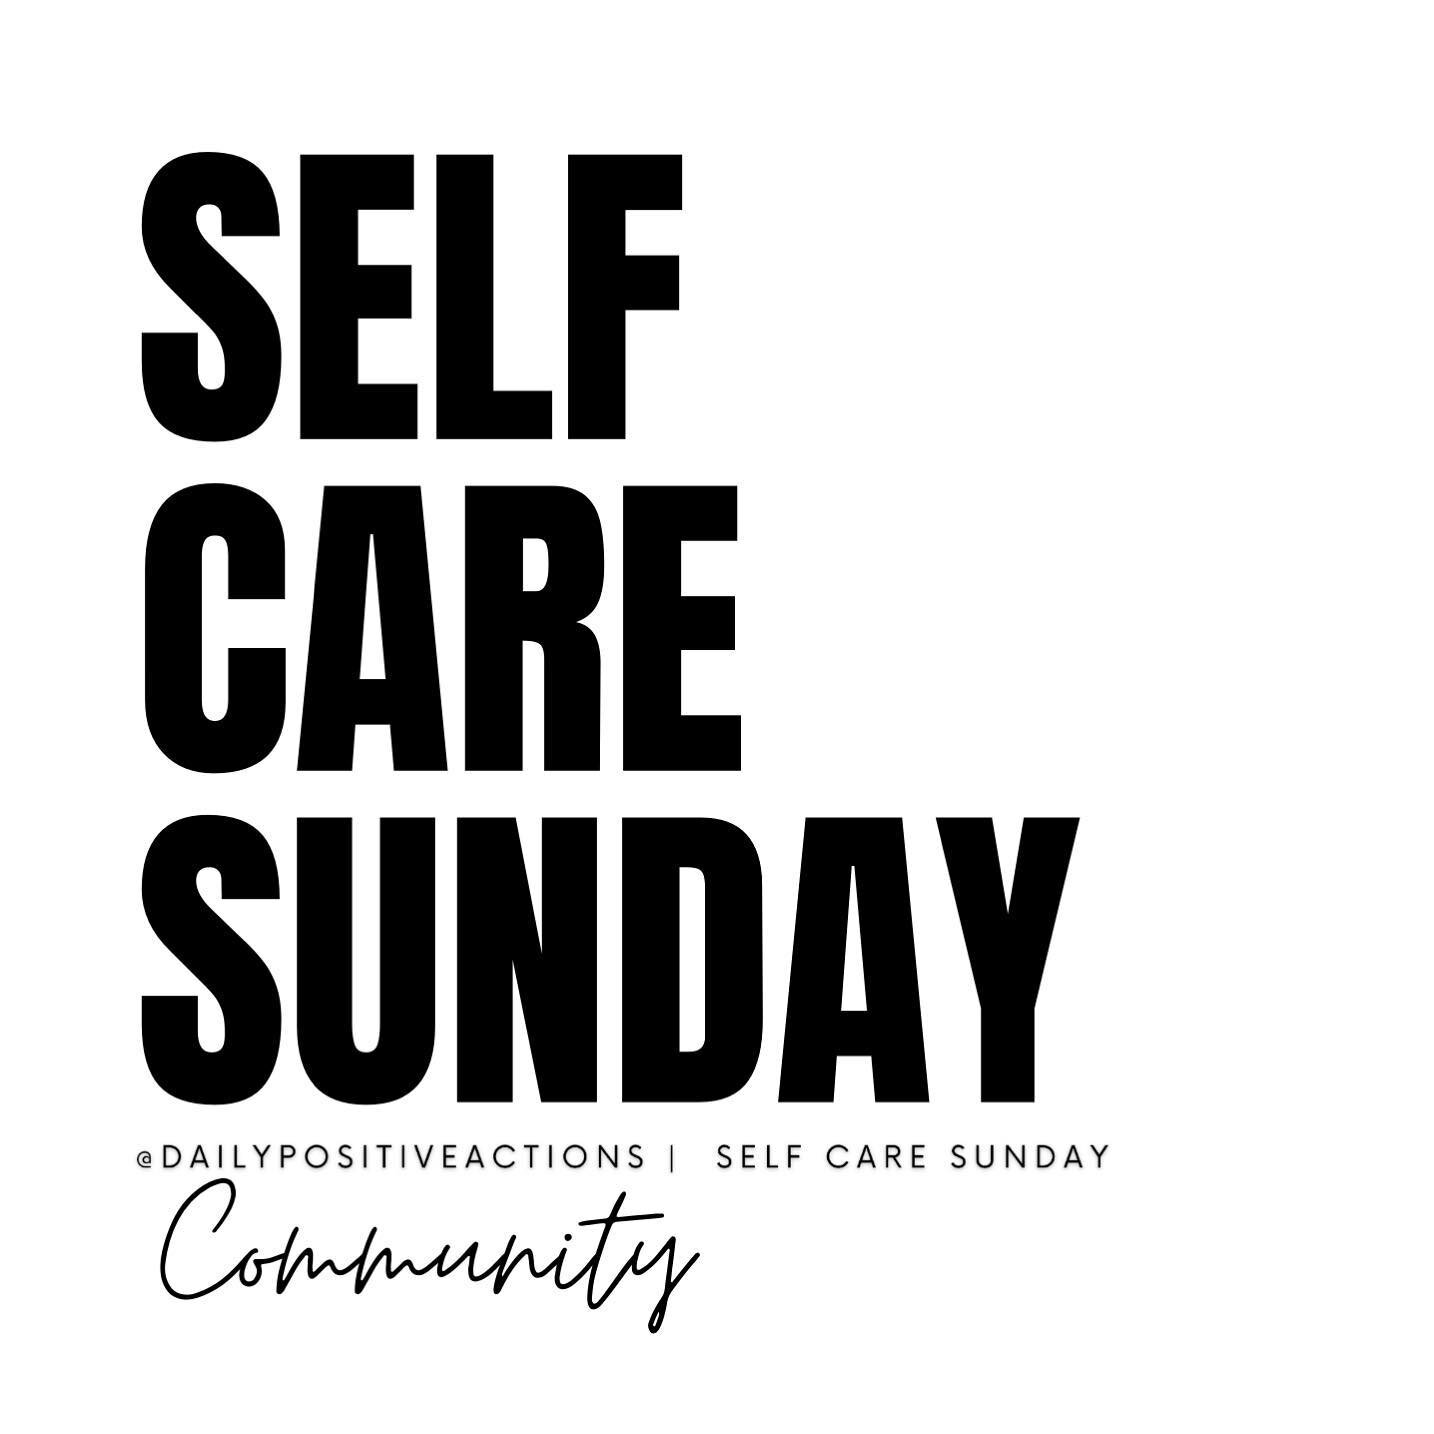 Here are some of the ways I embrace Self Care Sunday 👇
⠀
+ go for a long walk with @victoriagoddard1 
+ say hello to people on that walk.⠀
+ meditation &amp; breathwork⠀
+ eat a plant based brunch⠀
+ check in with friends &amp; family⠀
+ Listen to a